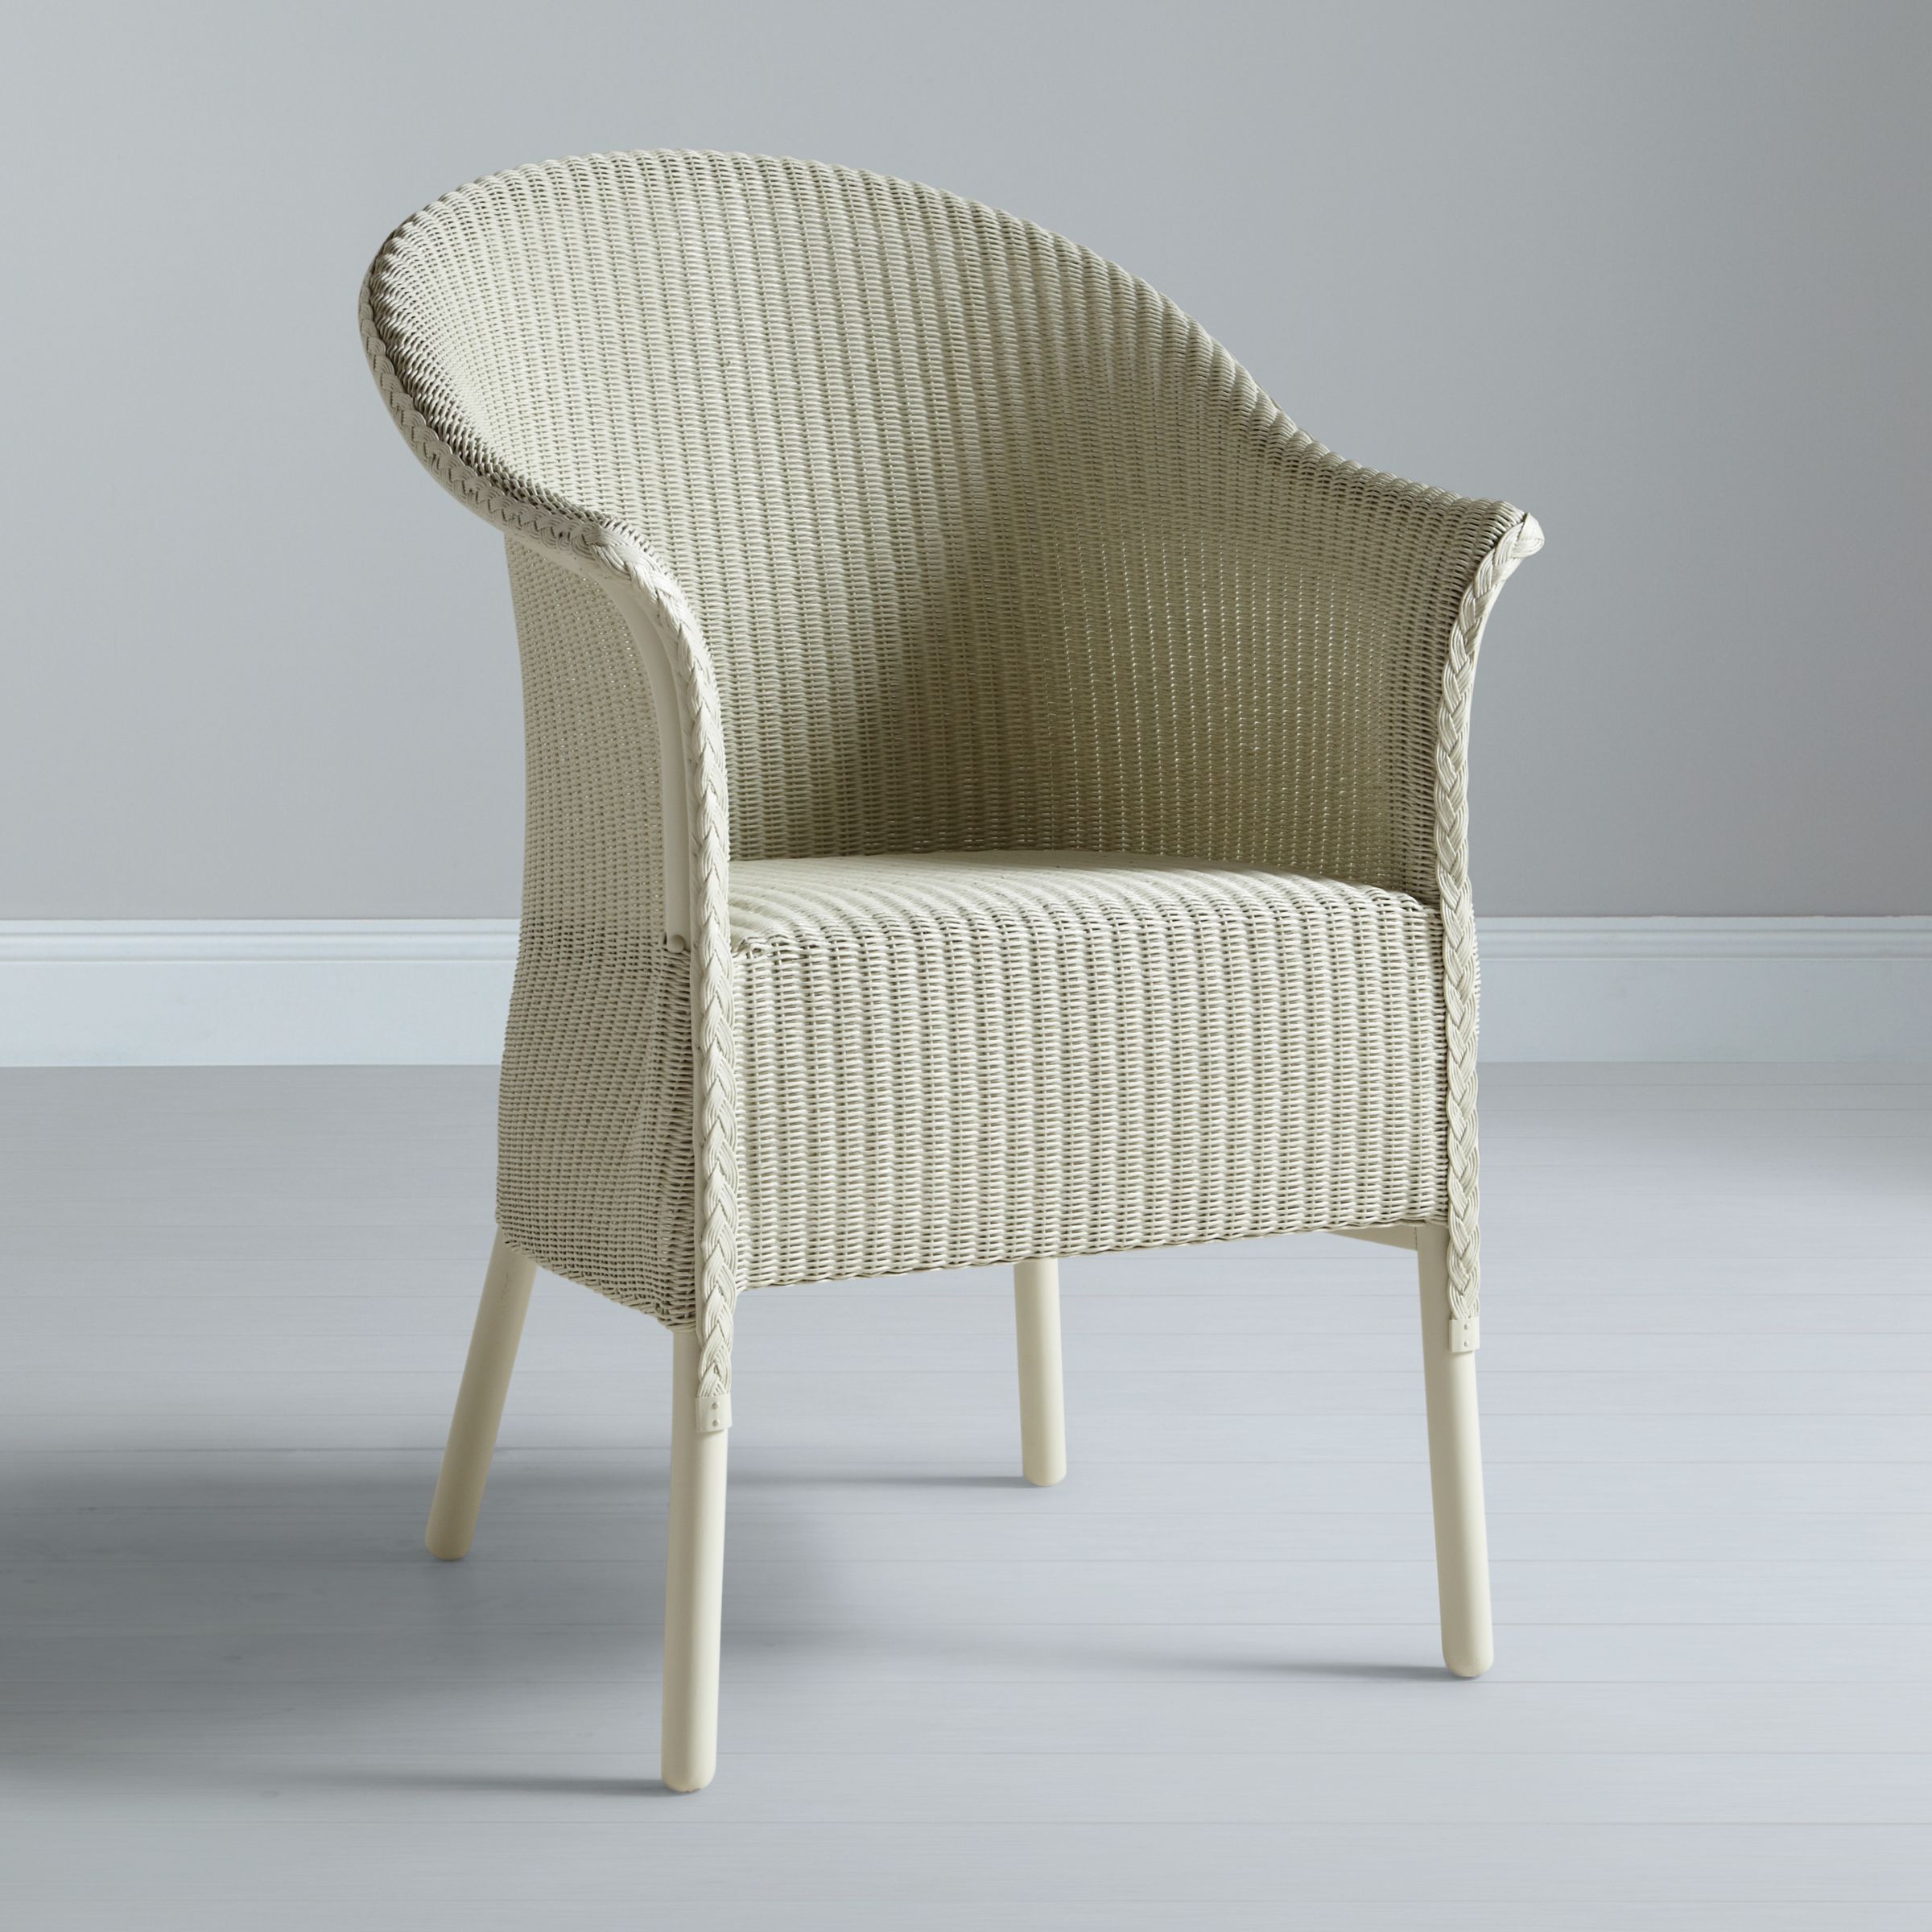 Lloyd Loom Of Spalding Belvoir Chair Nearly White At John Lewis